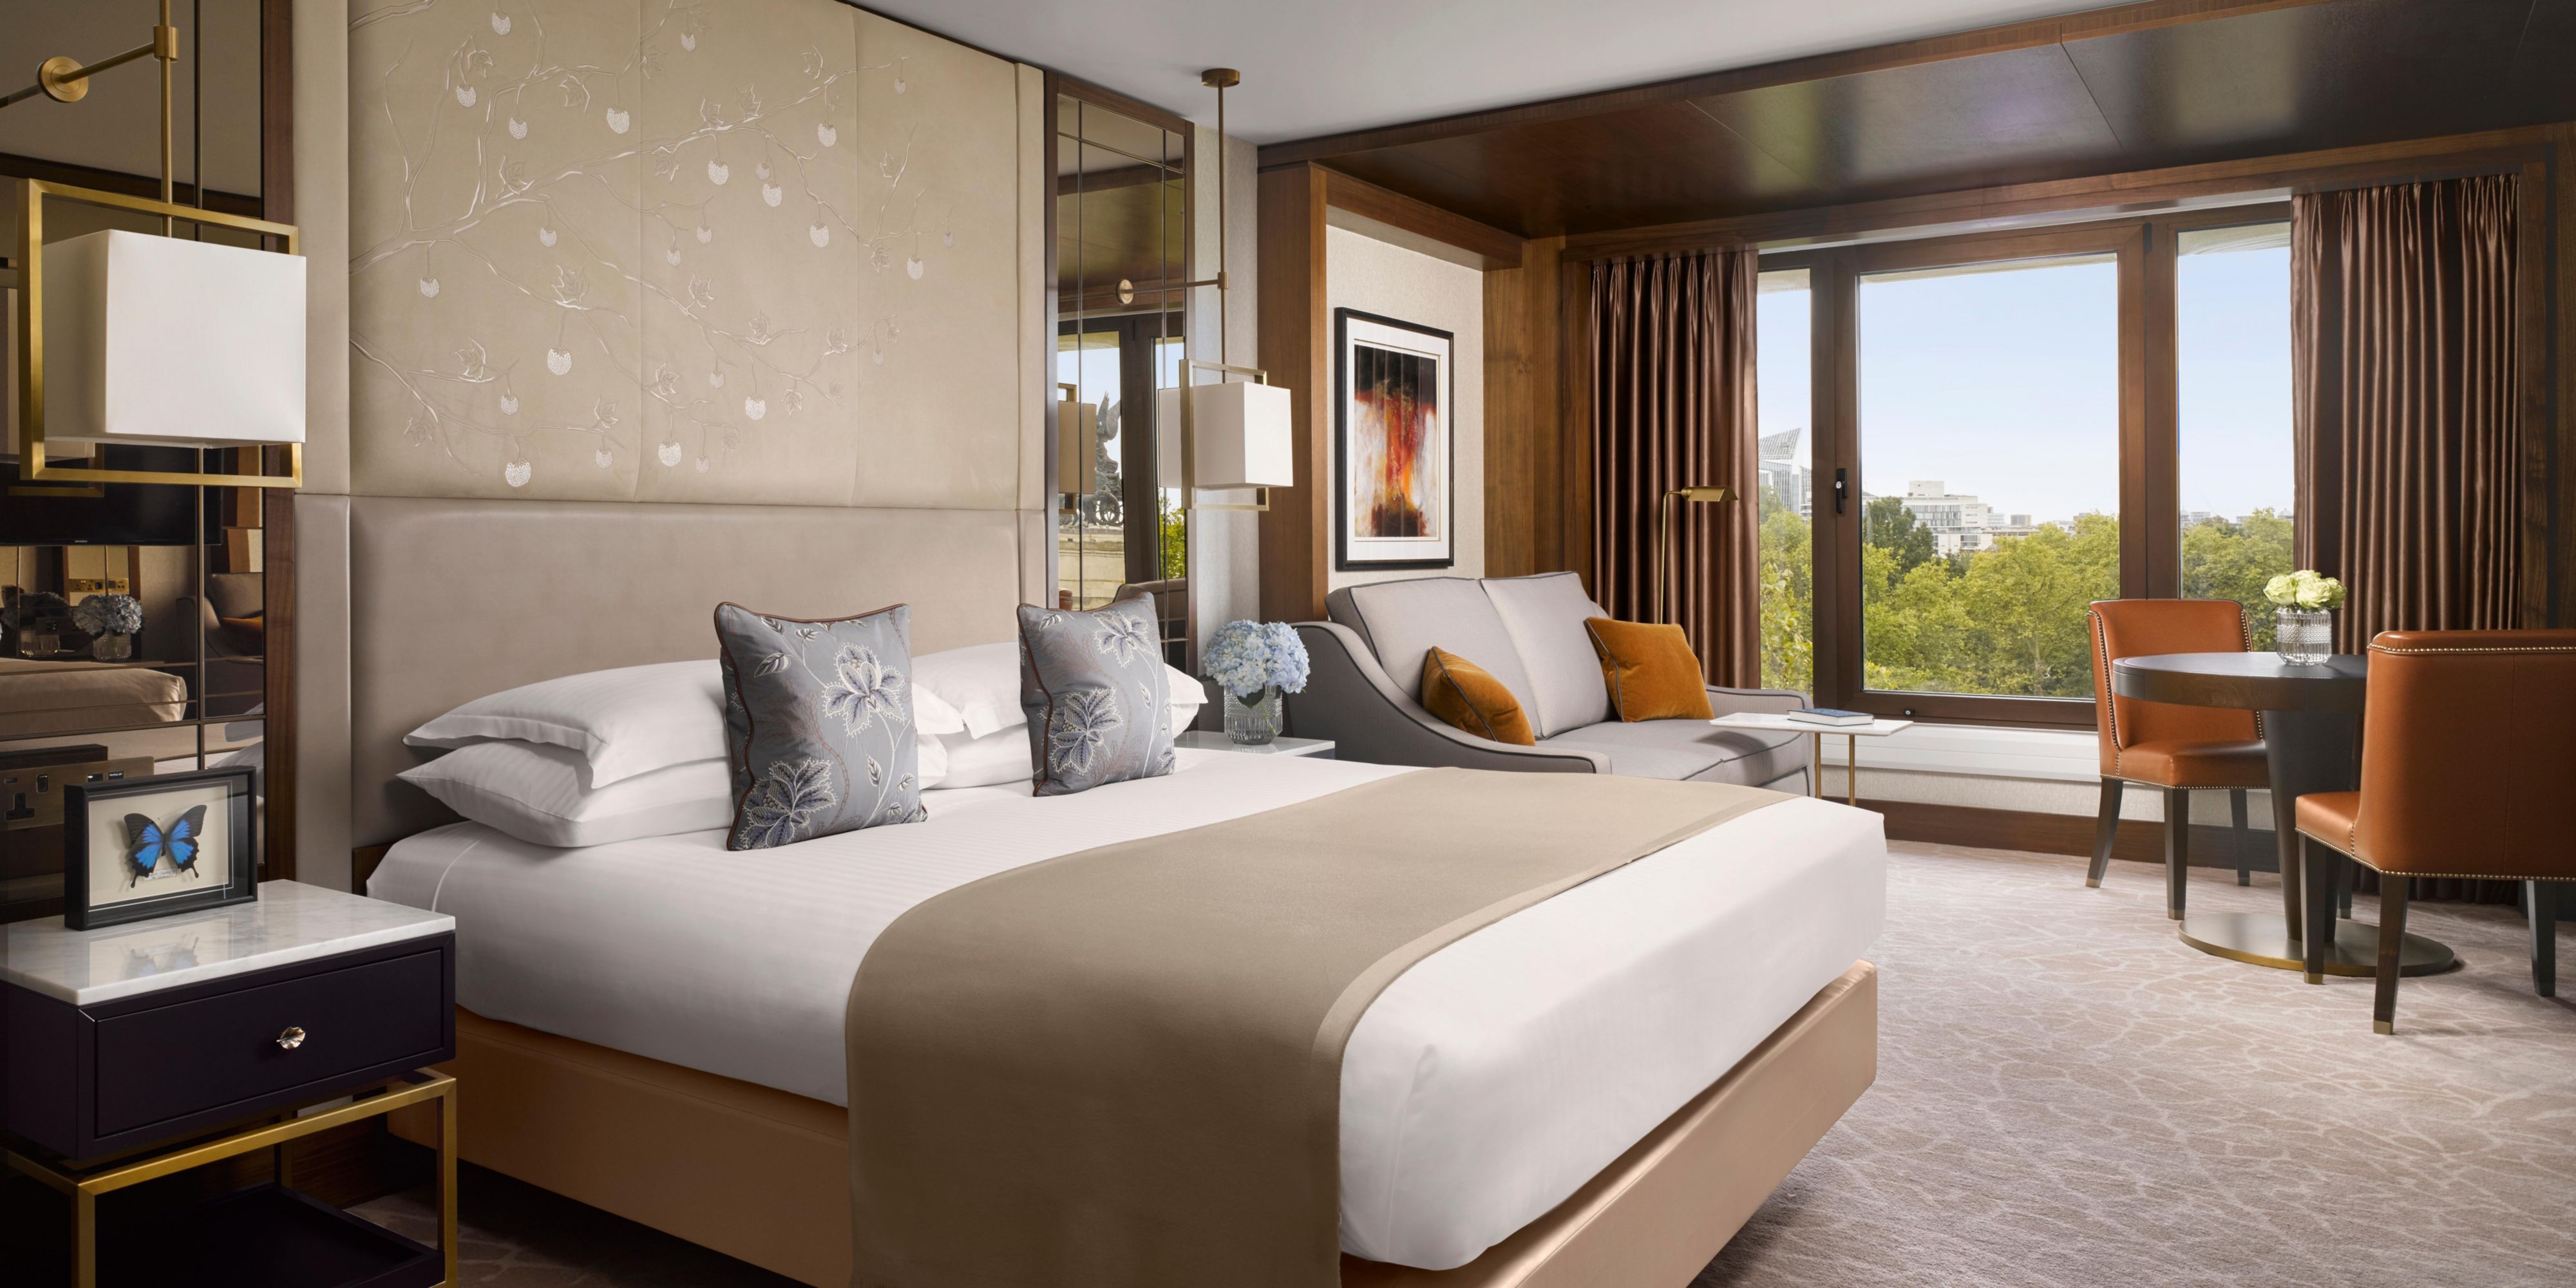 The newlyrefurbished Mayfair Collection has been impeccably designed to offer guests the highest standard of luxury accommodation in London. Combining natural tones, sumptuous textures, and modern amenities, the collection takes inspiration from its unparalleled location overlooking the Royal Parks in the heart of London. 